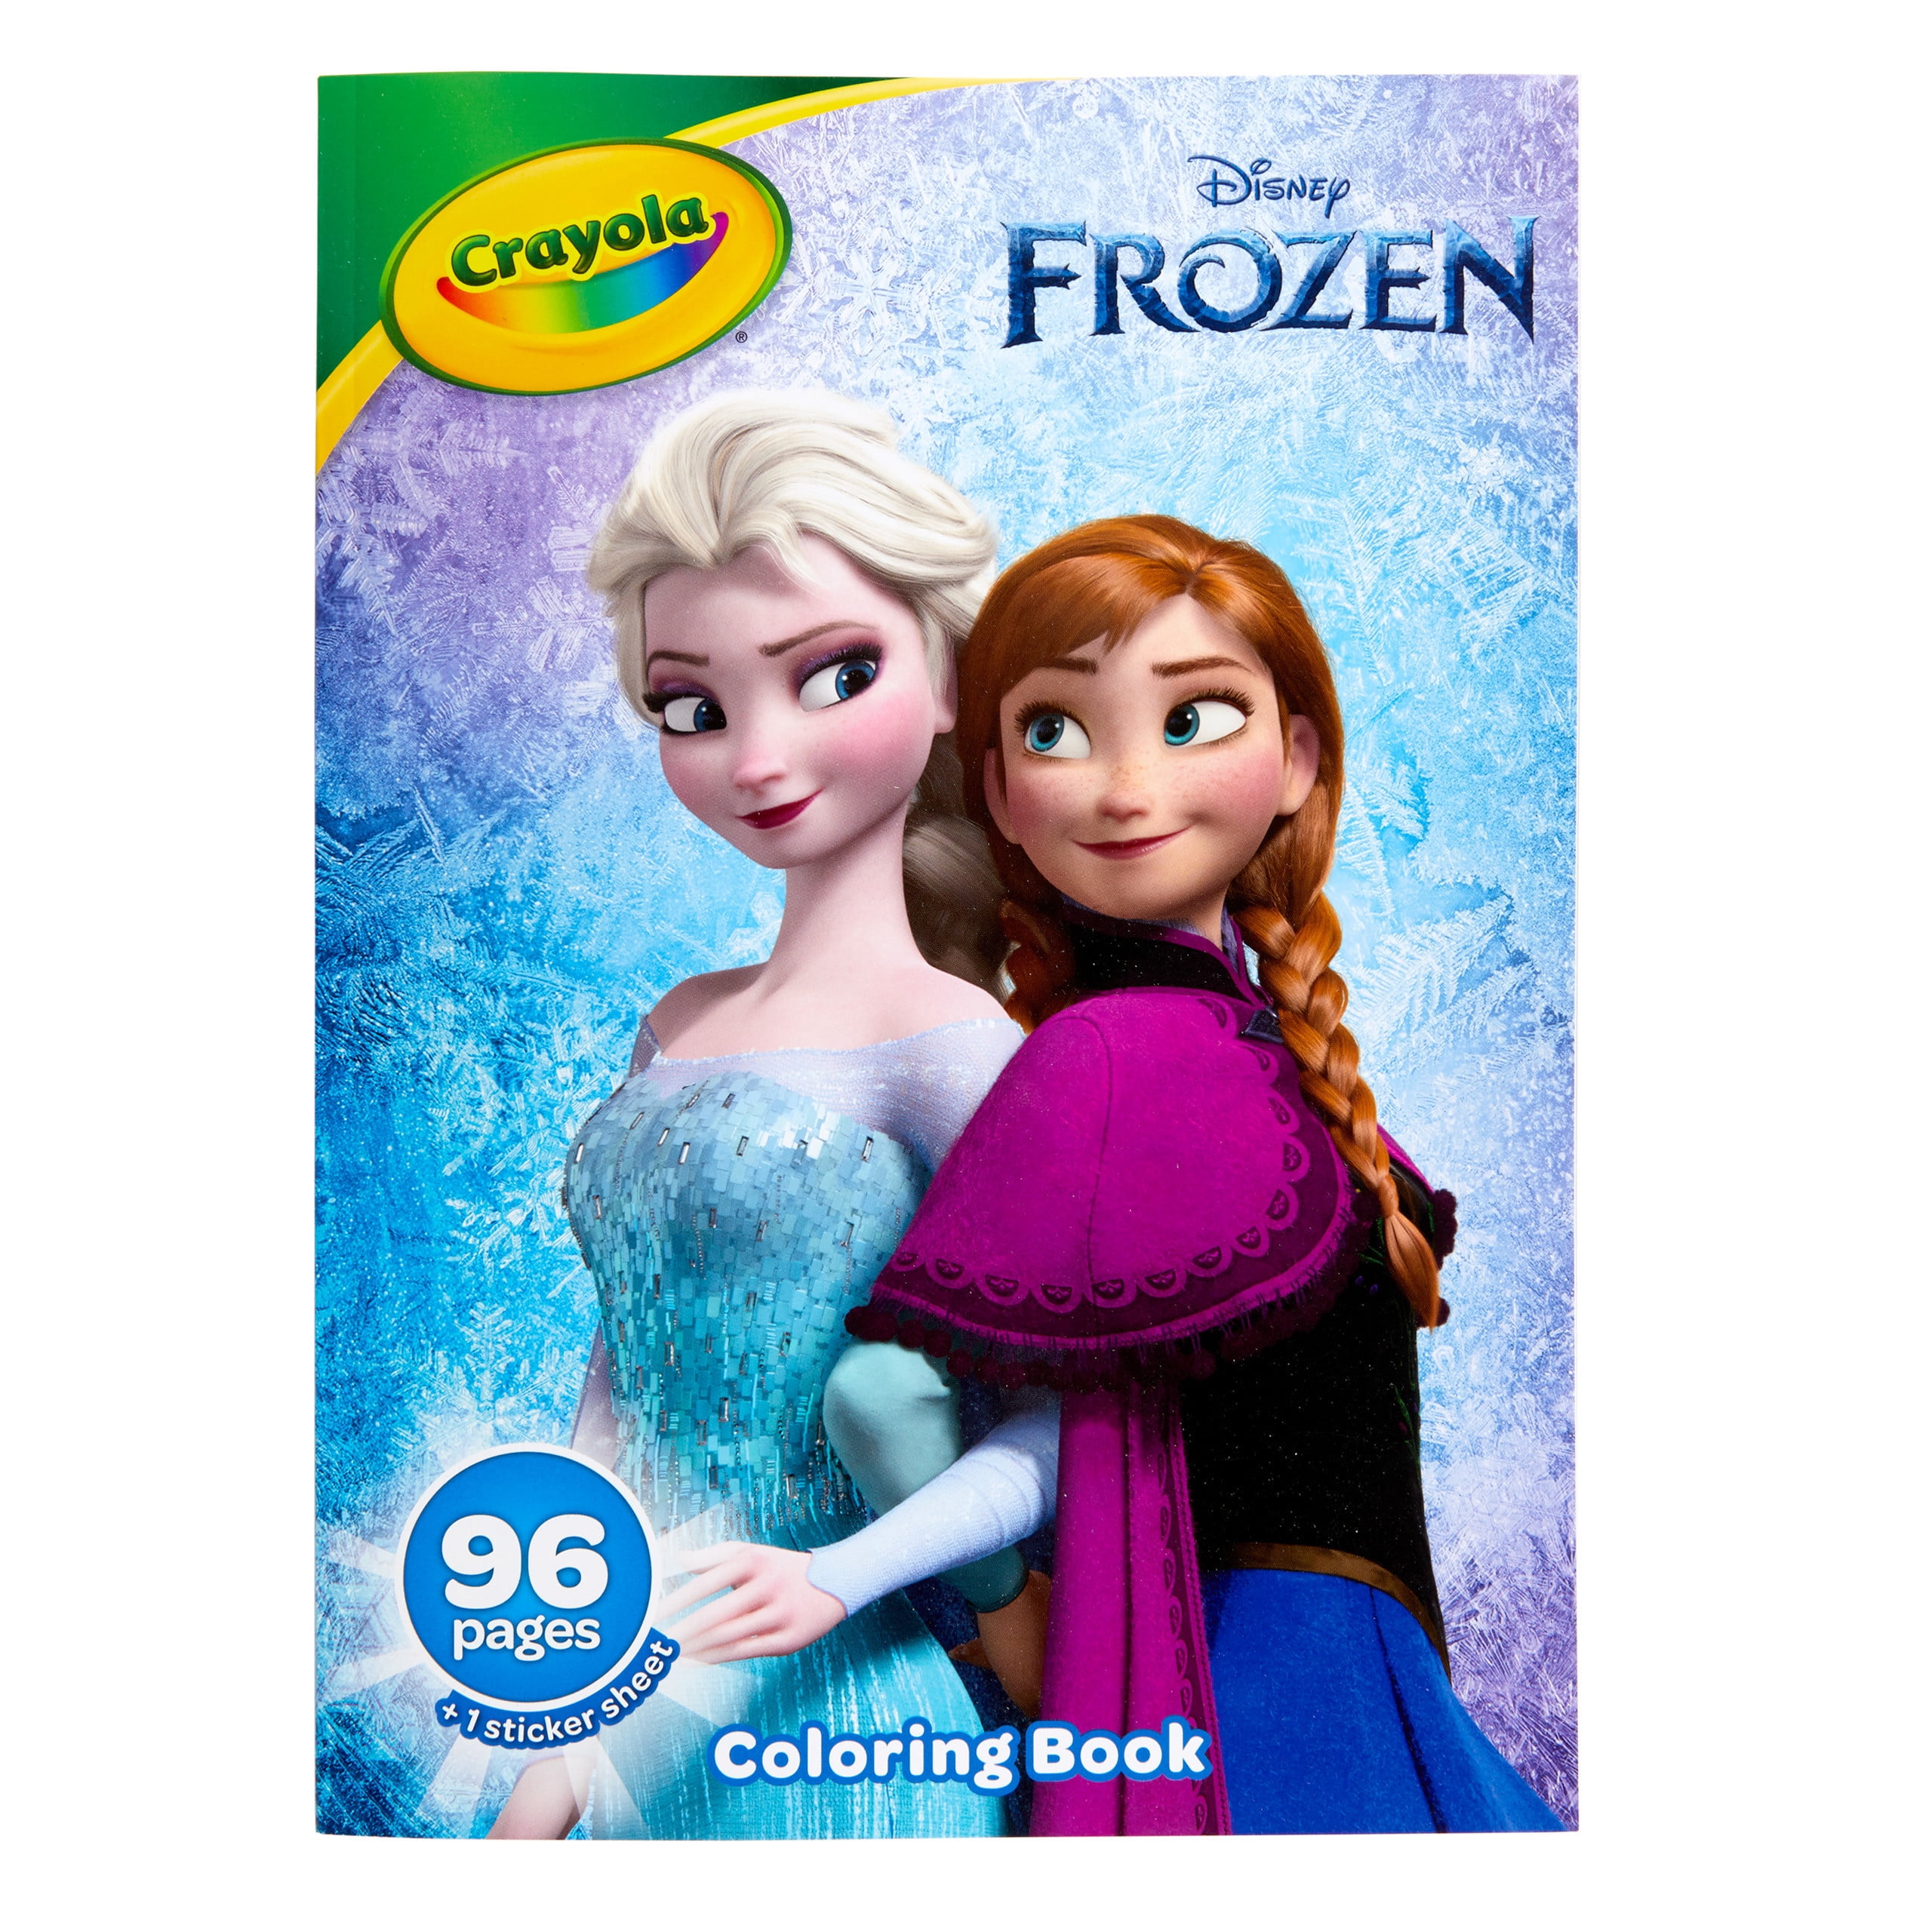 Crayola Frozen 21 Coloring Book with Stickers, 21 Pages, Gift for Kids